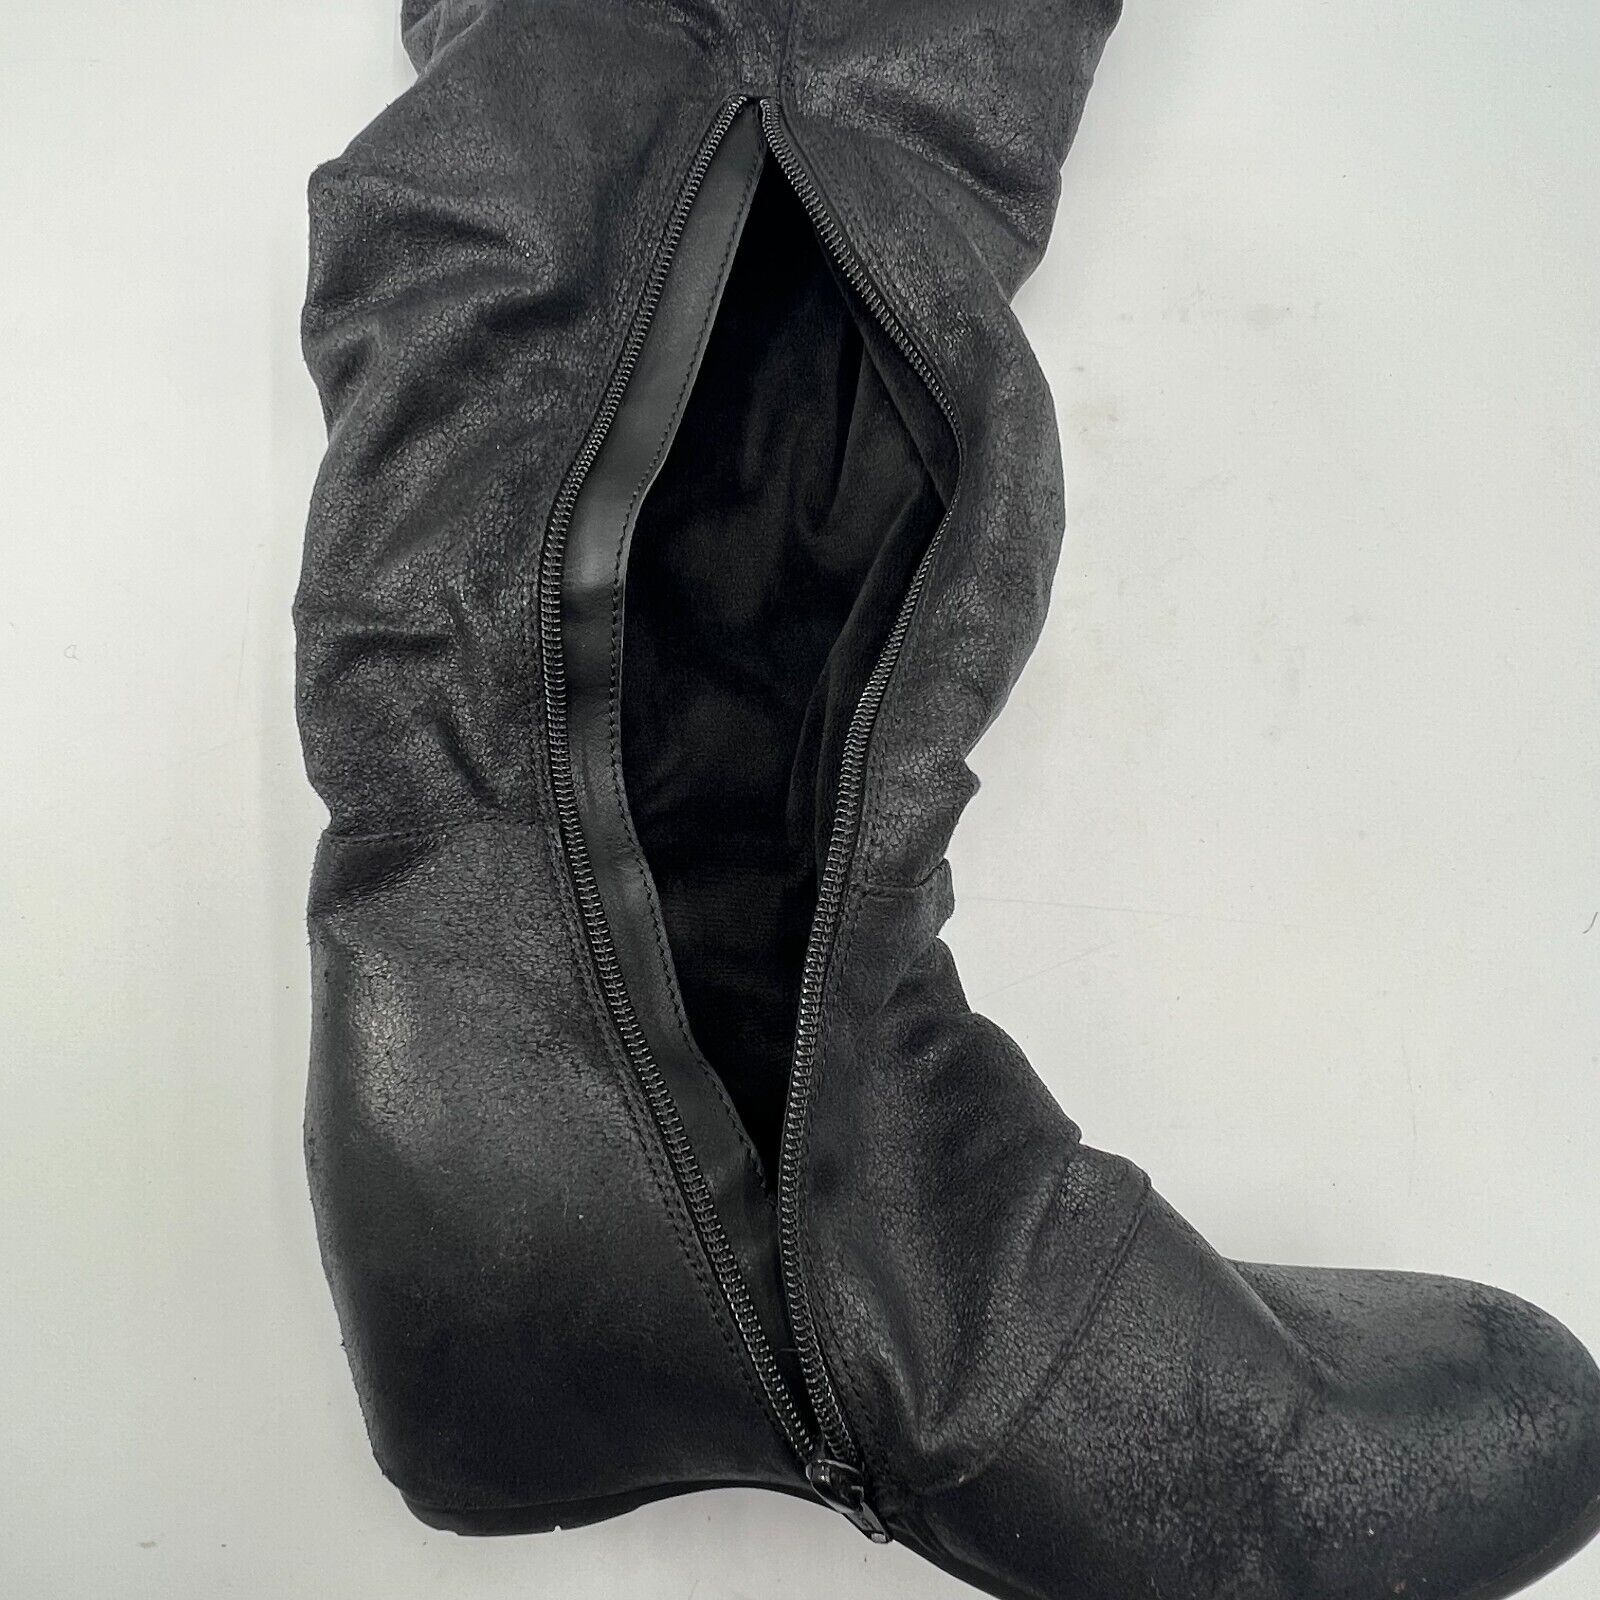 Baretraps Over The Knee Or Fold Down Slouch 21”Boots Black Leather Size 7.5M